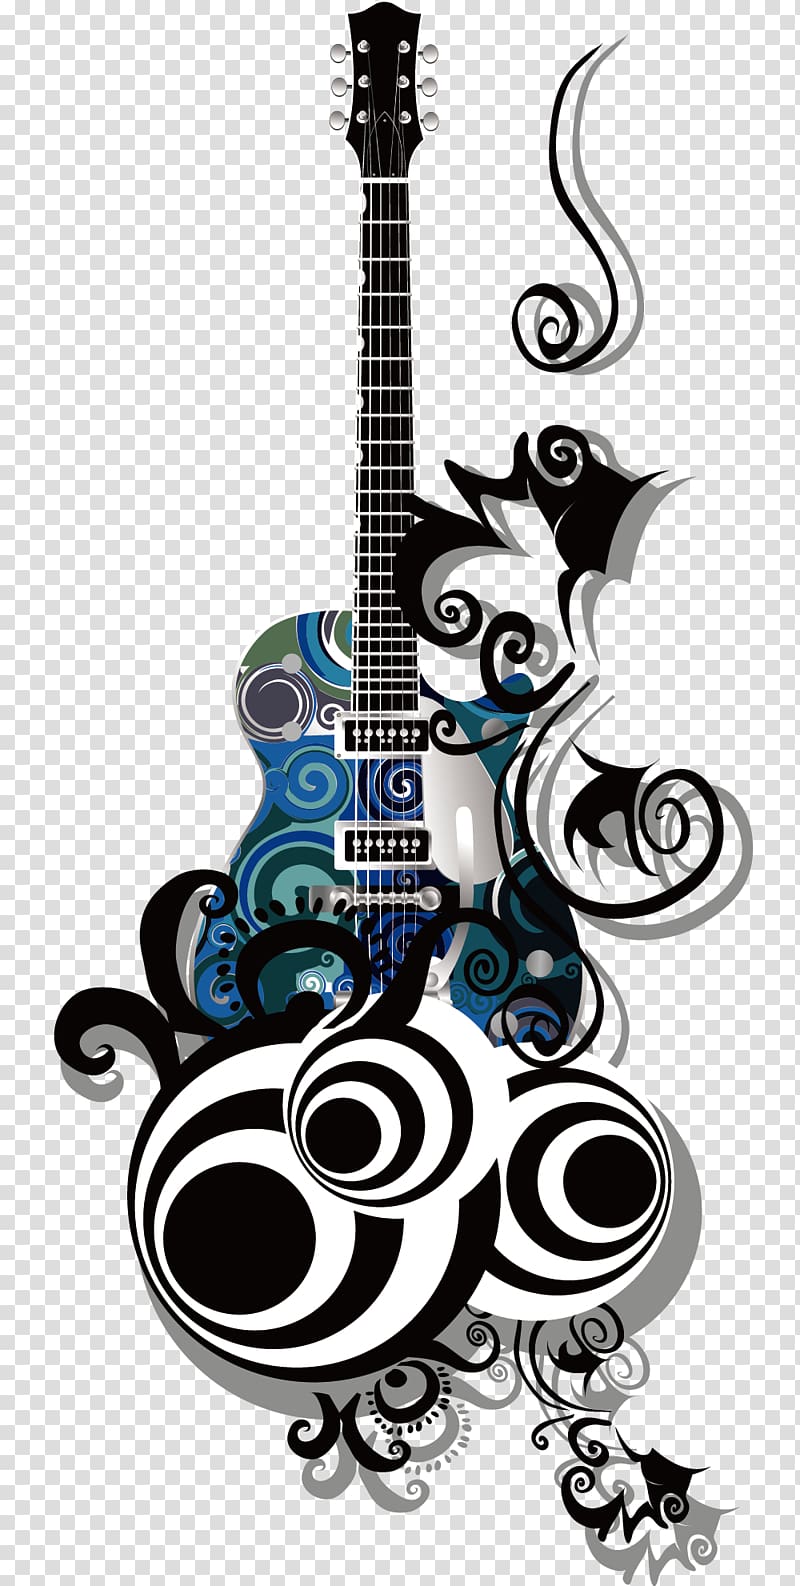 blue and black guitar , India Wall decal Sticker, Guitar and decorative patterns material transparent background PNG clipart